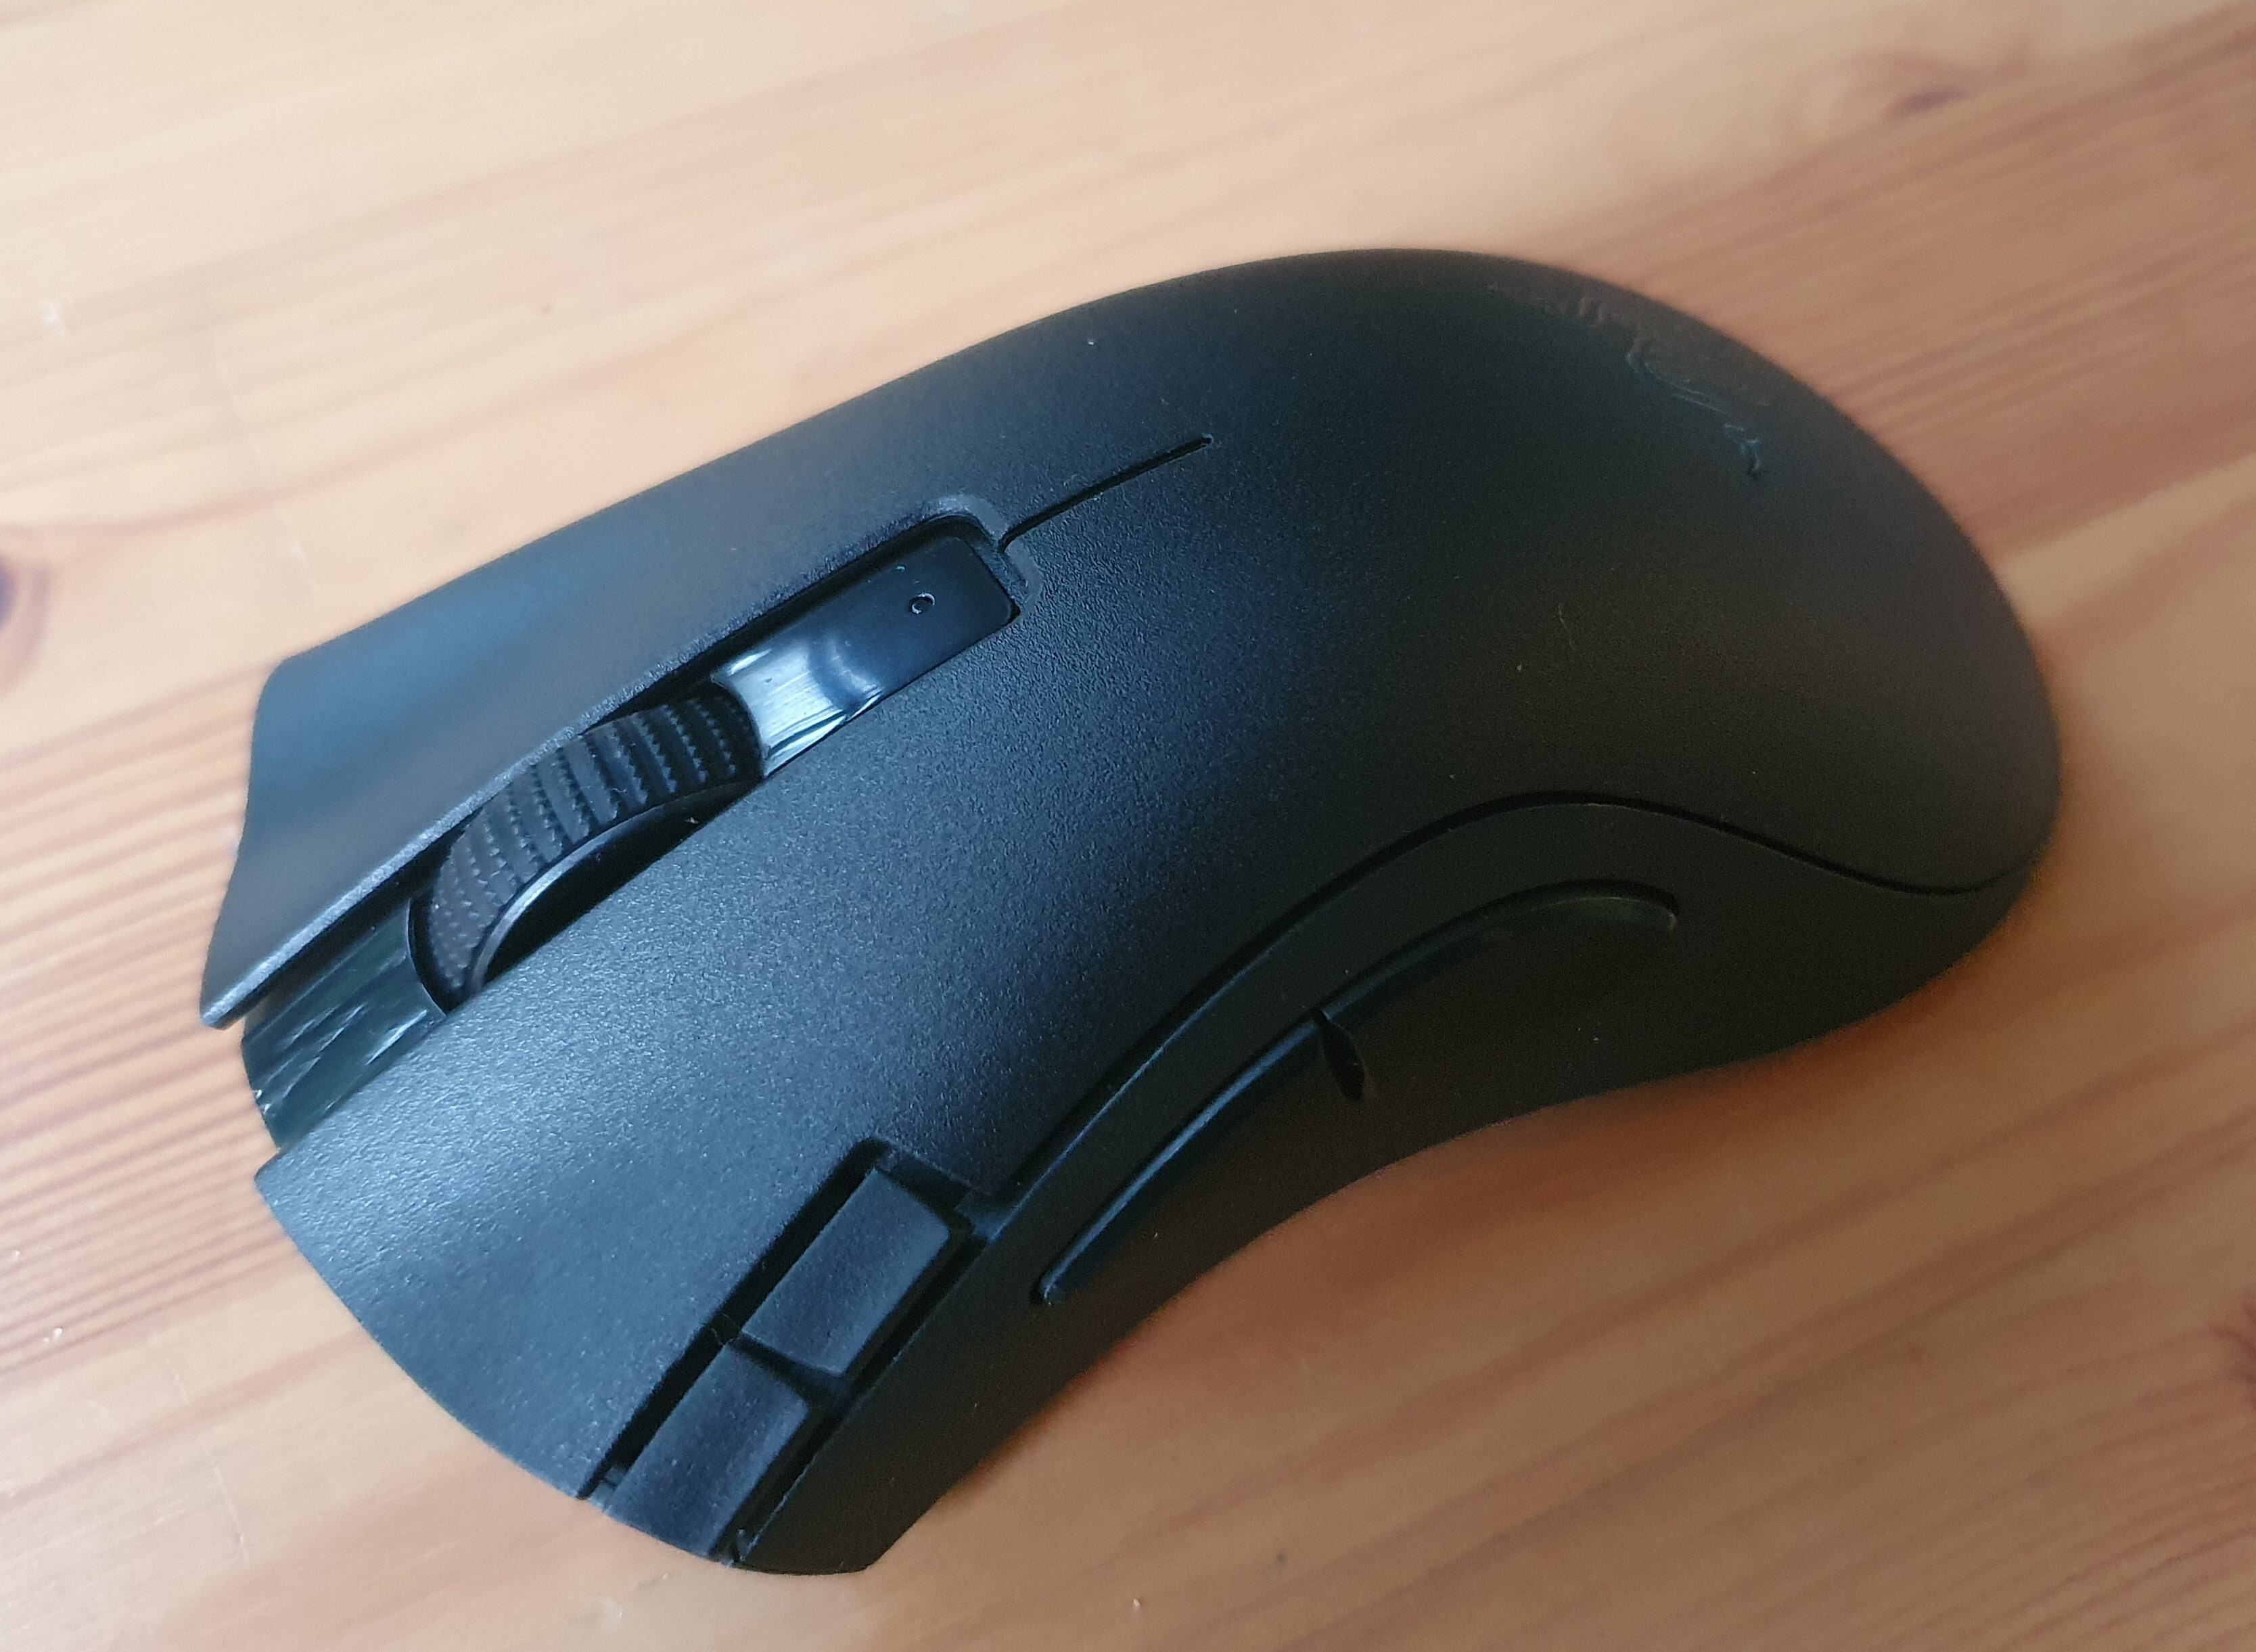  Razer DeathAdder V2 X Hyperspeed - Best dual-purpose budget mouse for gaming and productivity